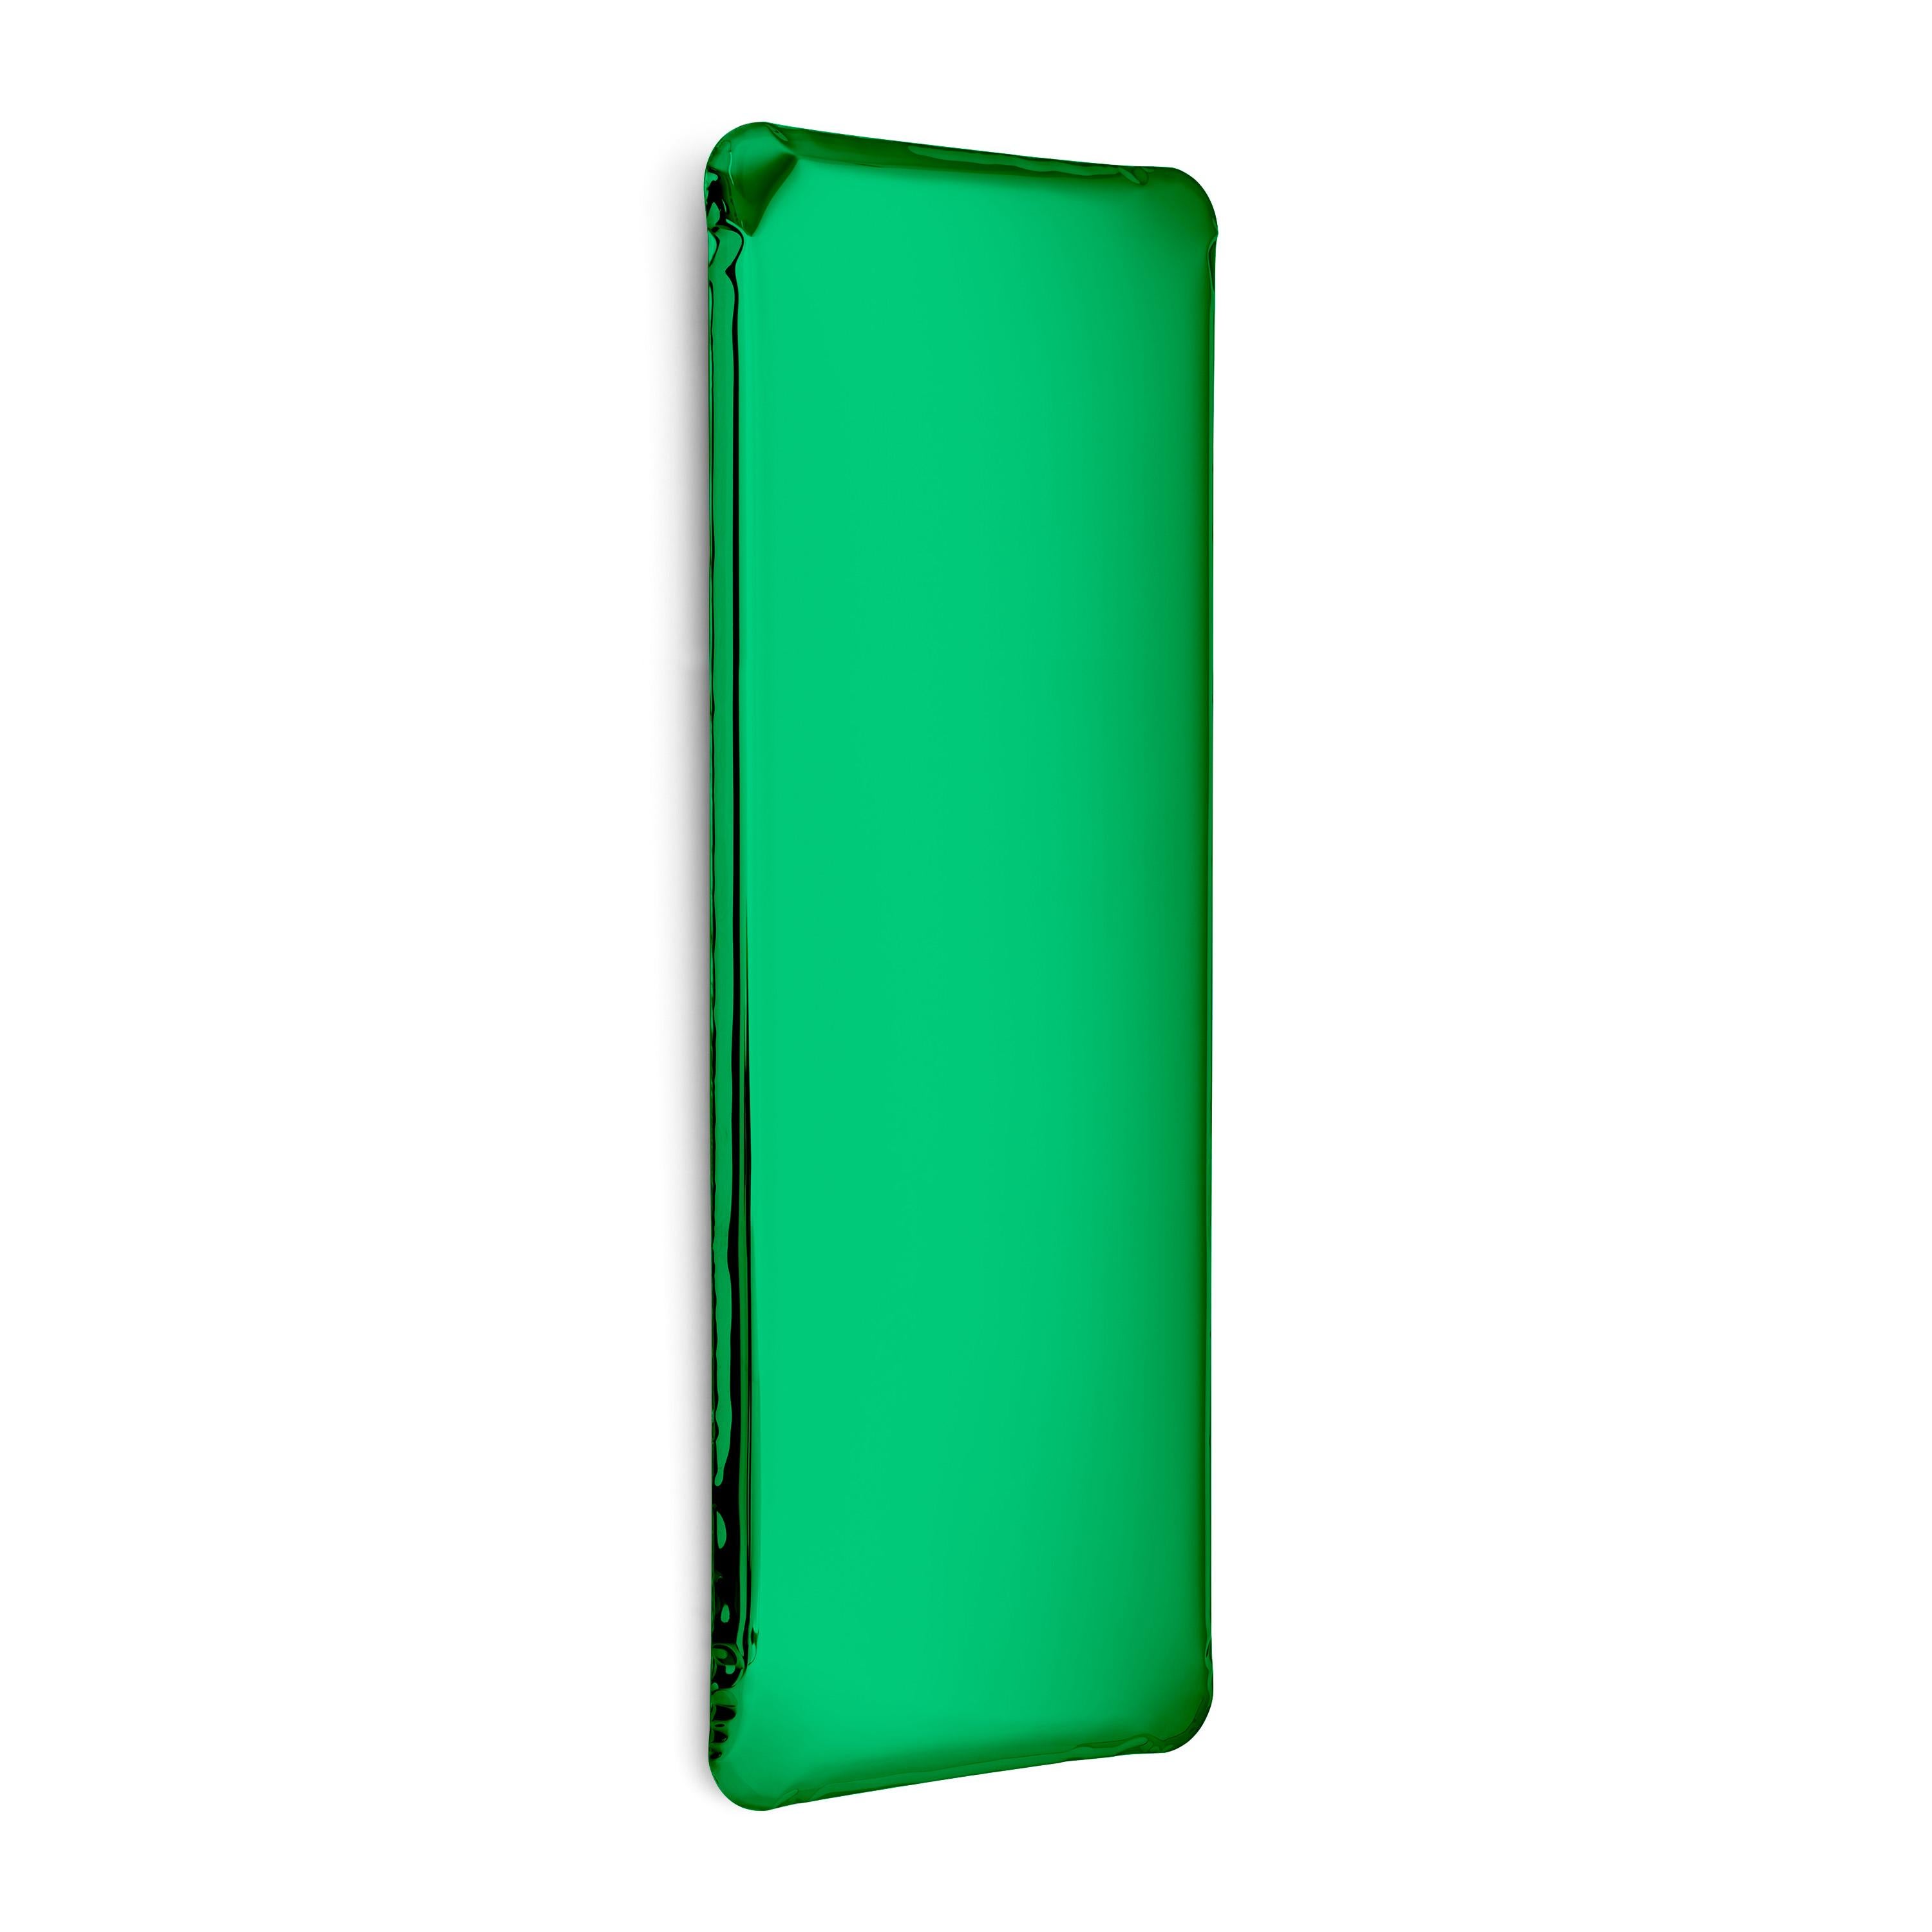 Emerald Tafla Q1 sculptural wall mirror by Zieta
Dimensions: D 6 x W 60 x H 180 cm 
Material: Stainless steel. 
Finish: Emerald.
Available in finishes: Stainless Steel, Deep Space Blue, Emerald, Saphire, Saphire/Emerald, Dark Matter, and Red Rubin.